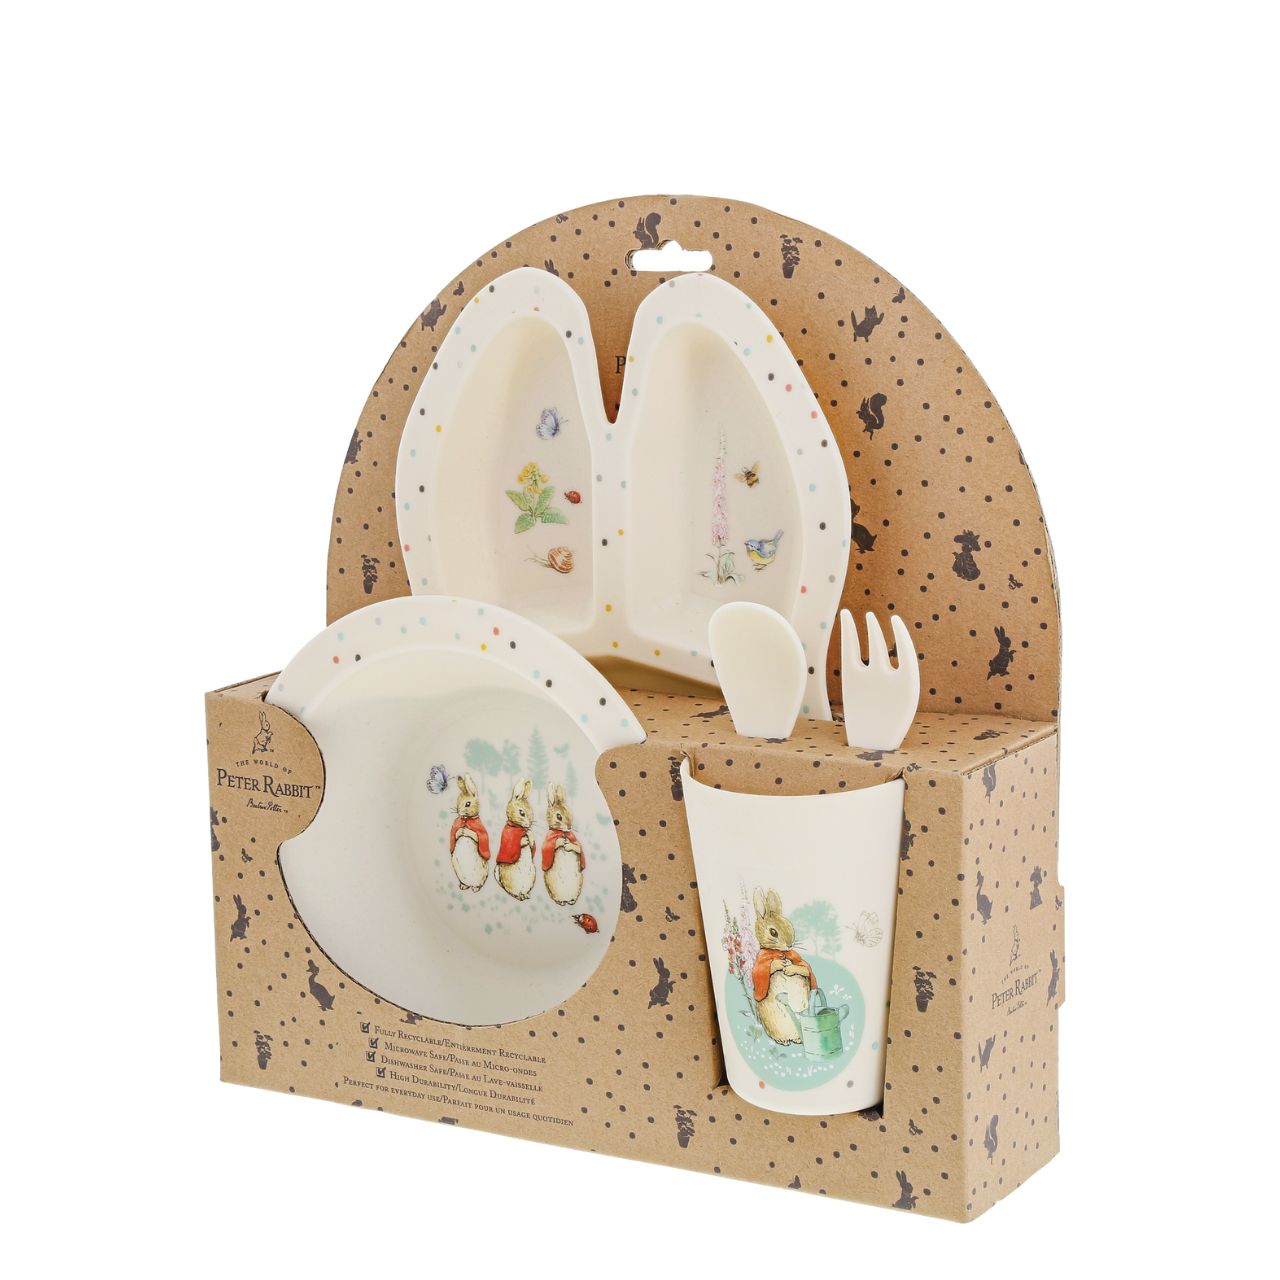 Peter Rabbit Flopsy Dinner Set  Introducing this brand new at home with Peter Rabbit collection. There's nothing quite like a fun Flopsy motif to entice those little tummies to clear their plates. Make mealtimes fun and practical with this dinner set. This highly durable dinner set can be used at home, in the garden, or on the go.